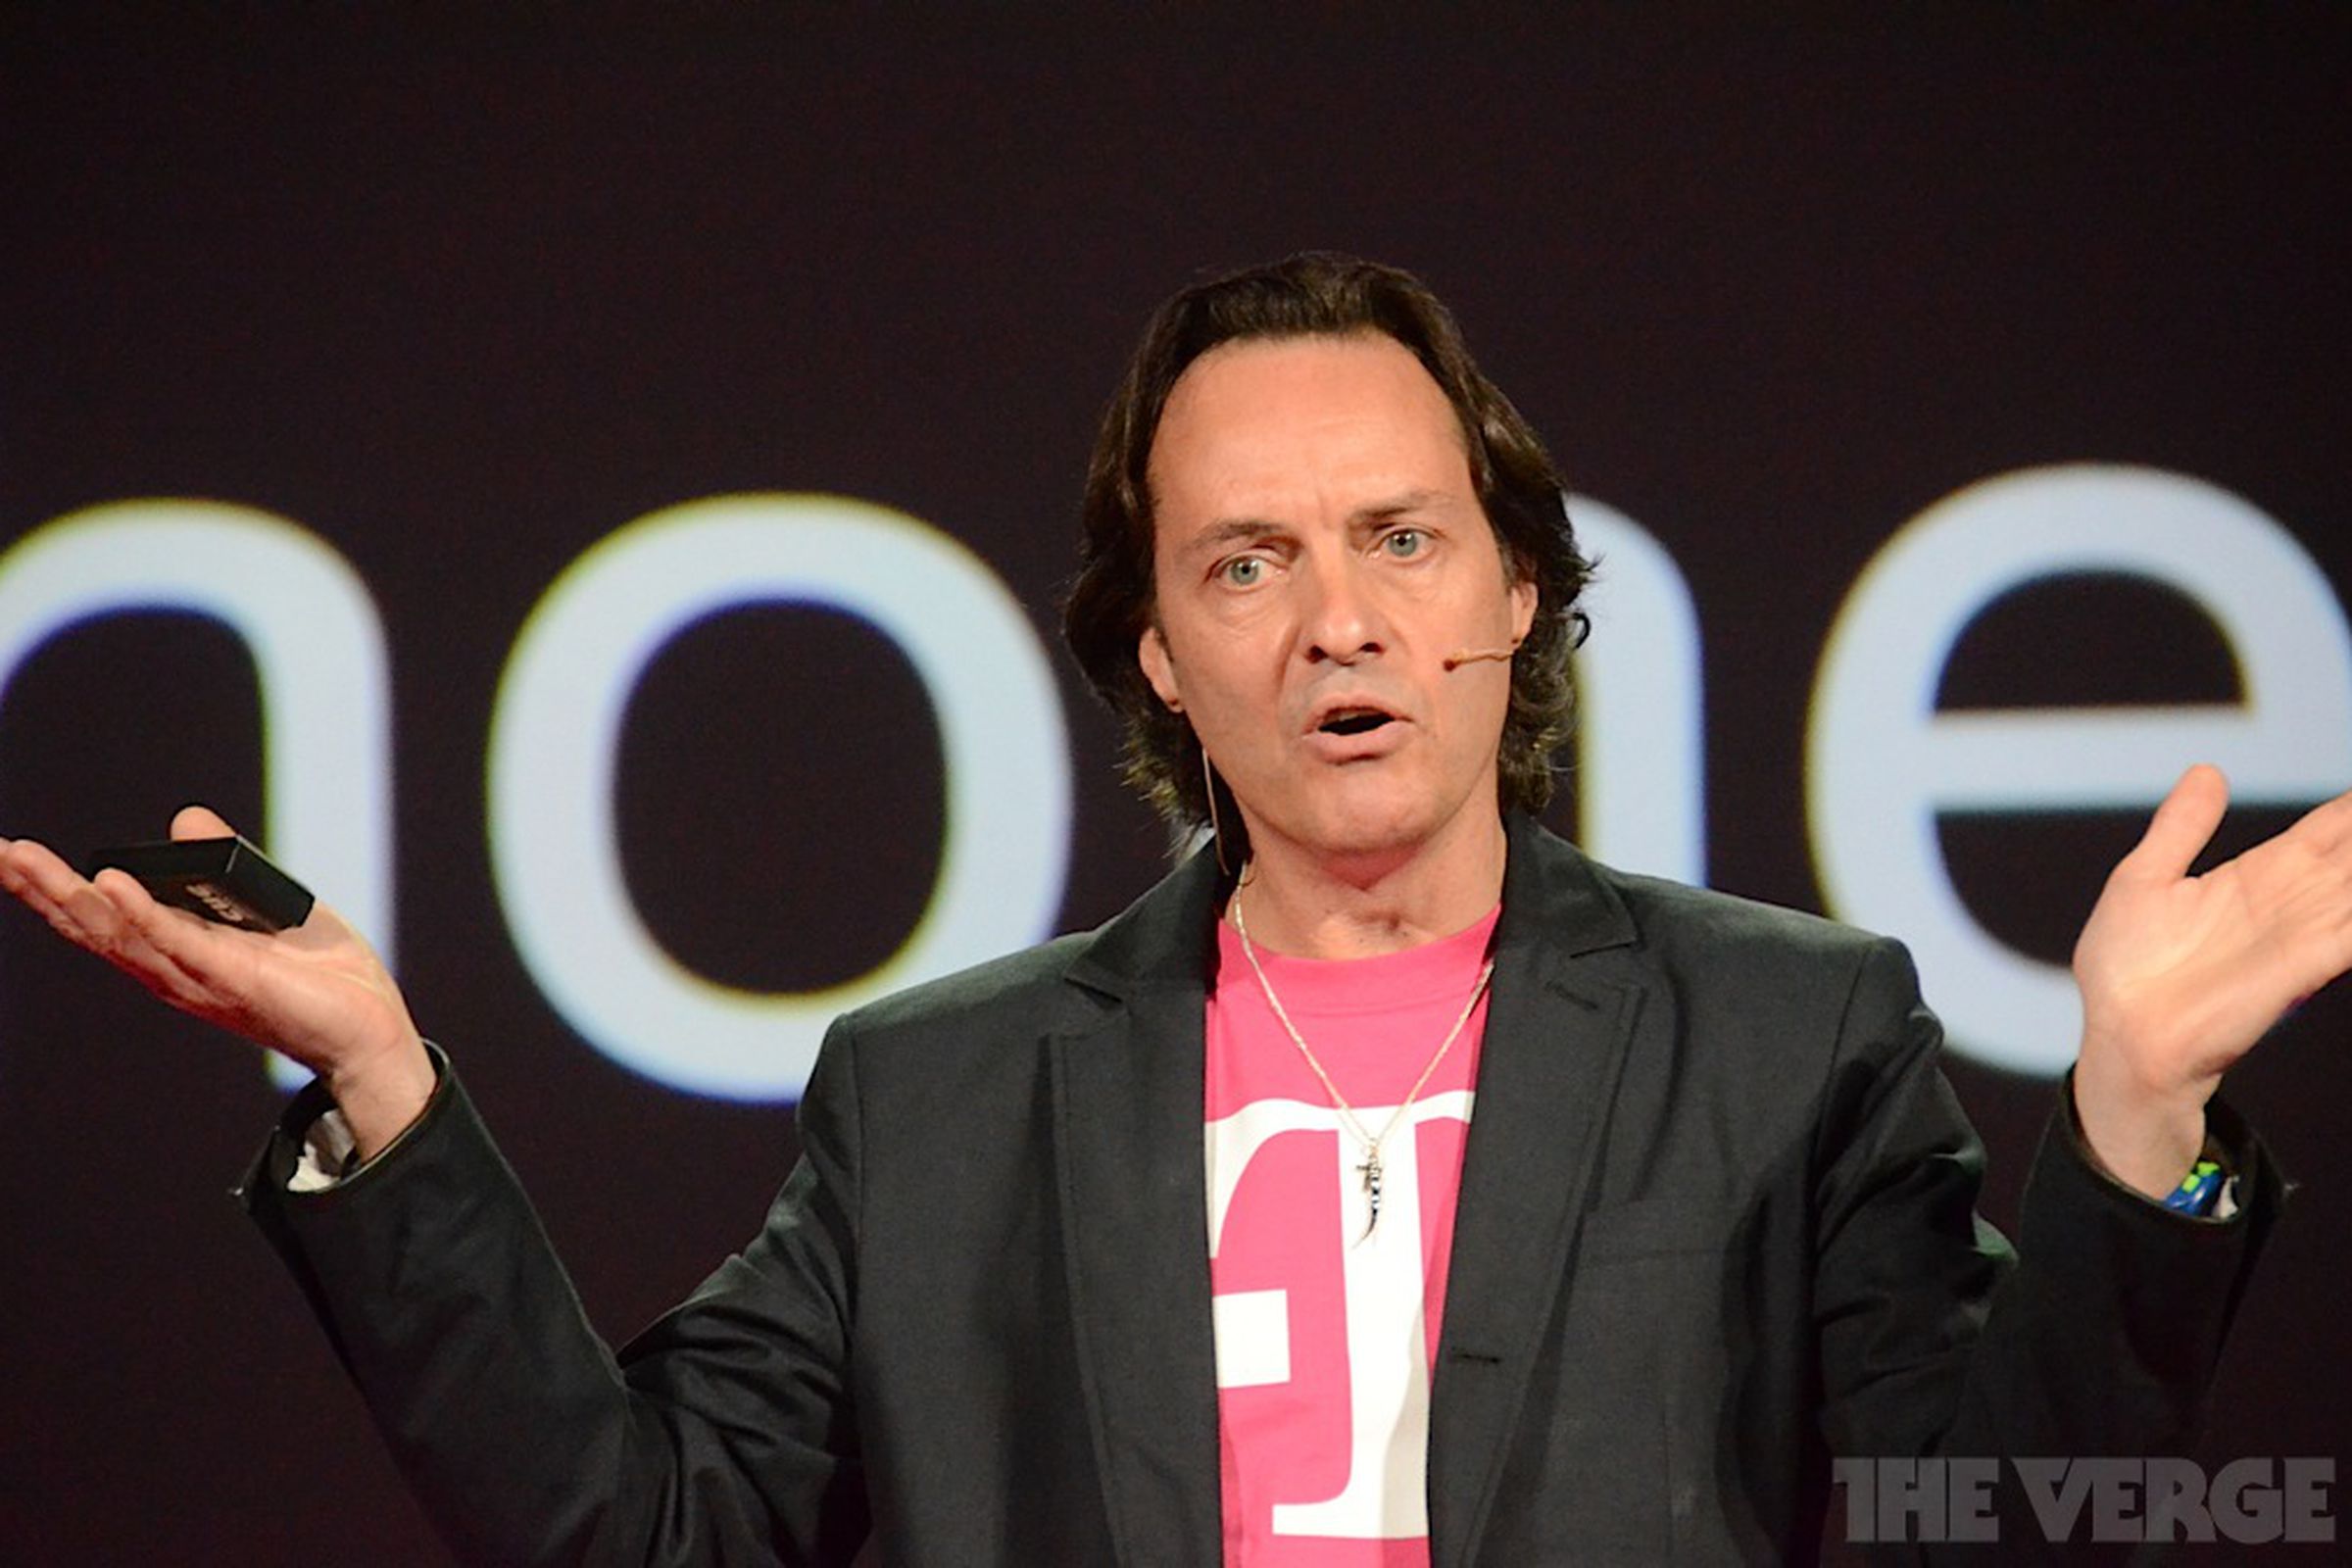 T-Mobile CEO John Legere - "Really don't care"